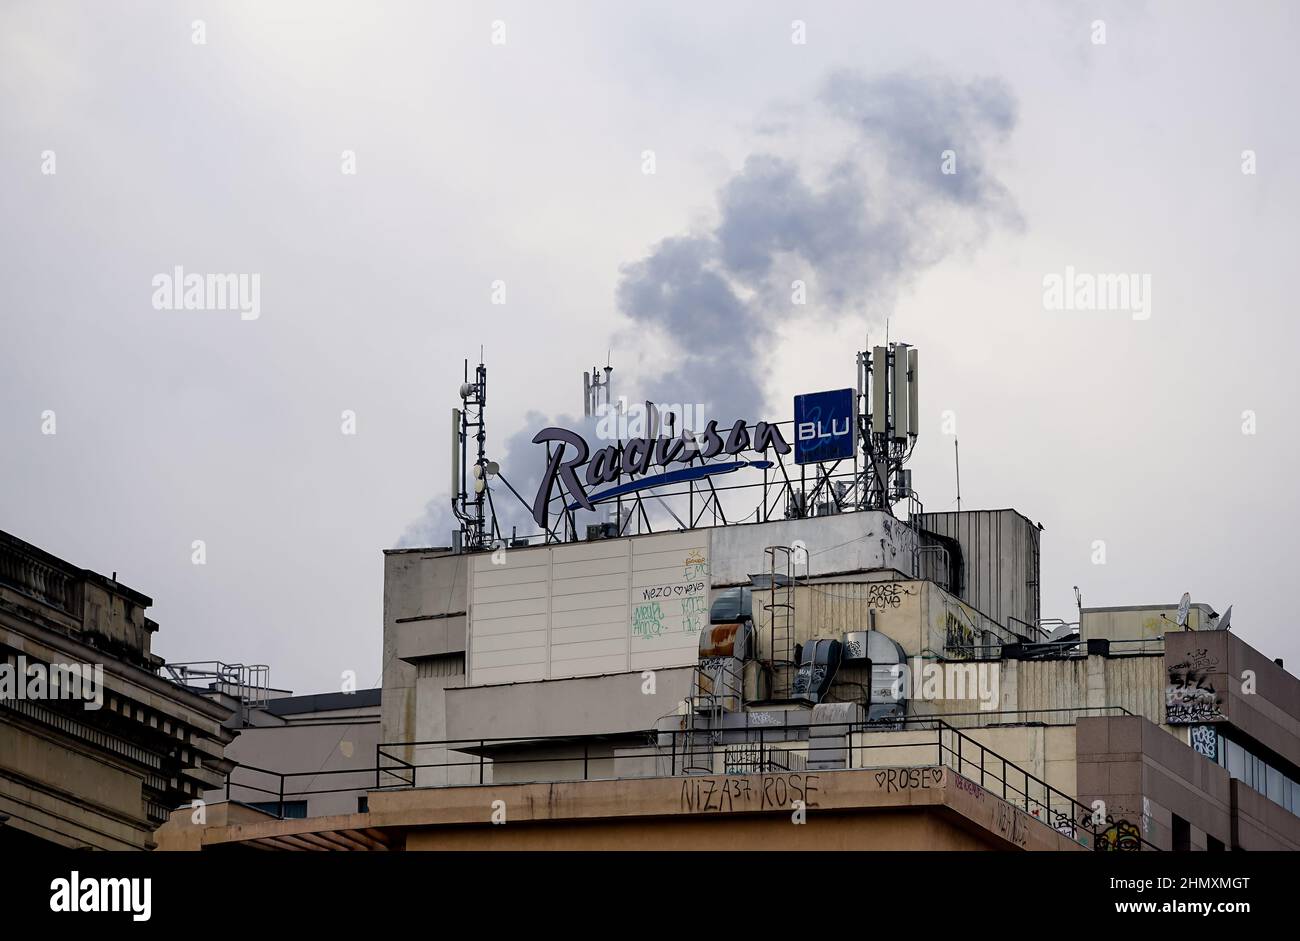 Bucharest, Romania - January 12, 2022: Many GSM telecommunications antennas are installed on top of Radisson Blu Hotel Bucharest. This image is for ed Stock Photo